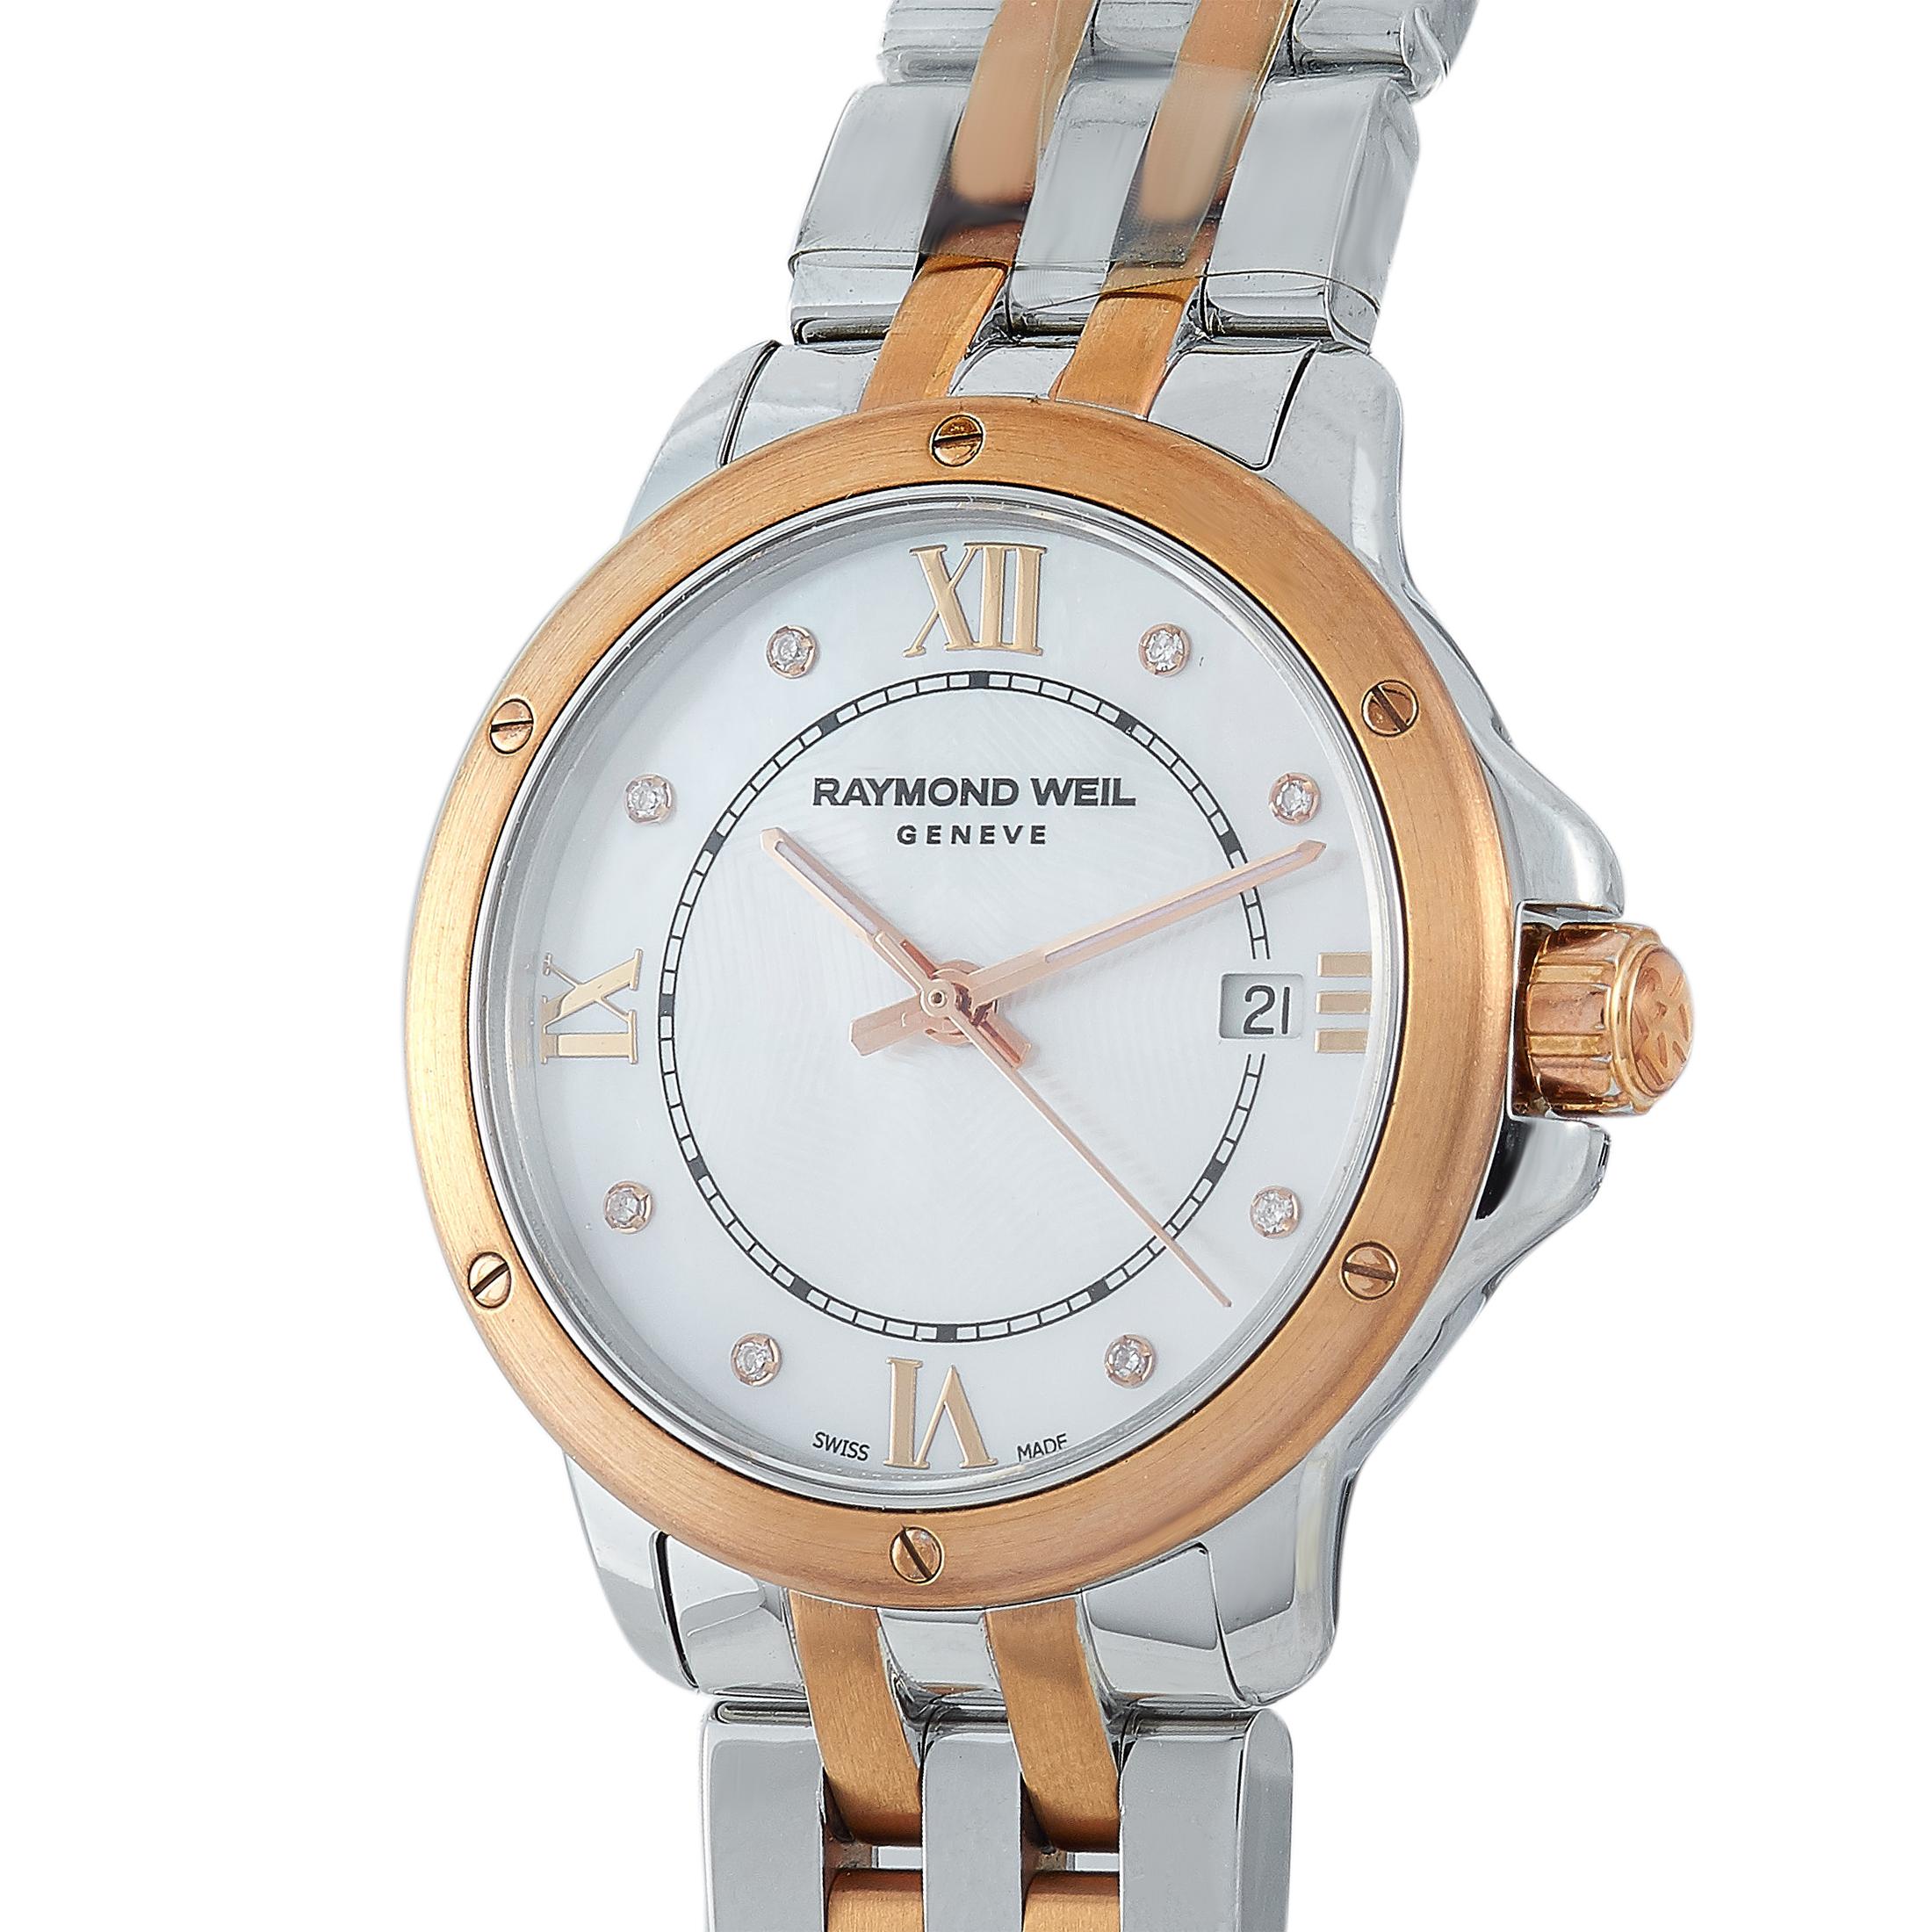 The Raymond Weil Tango, reference number 5391-SP5-00995, is a member of the exquisite “Tango” collection.

The watch is presented with a 28 mm stainless steel case that boasts a rose gold PVD-plated stainless steel bezel. The case is mounted onto a